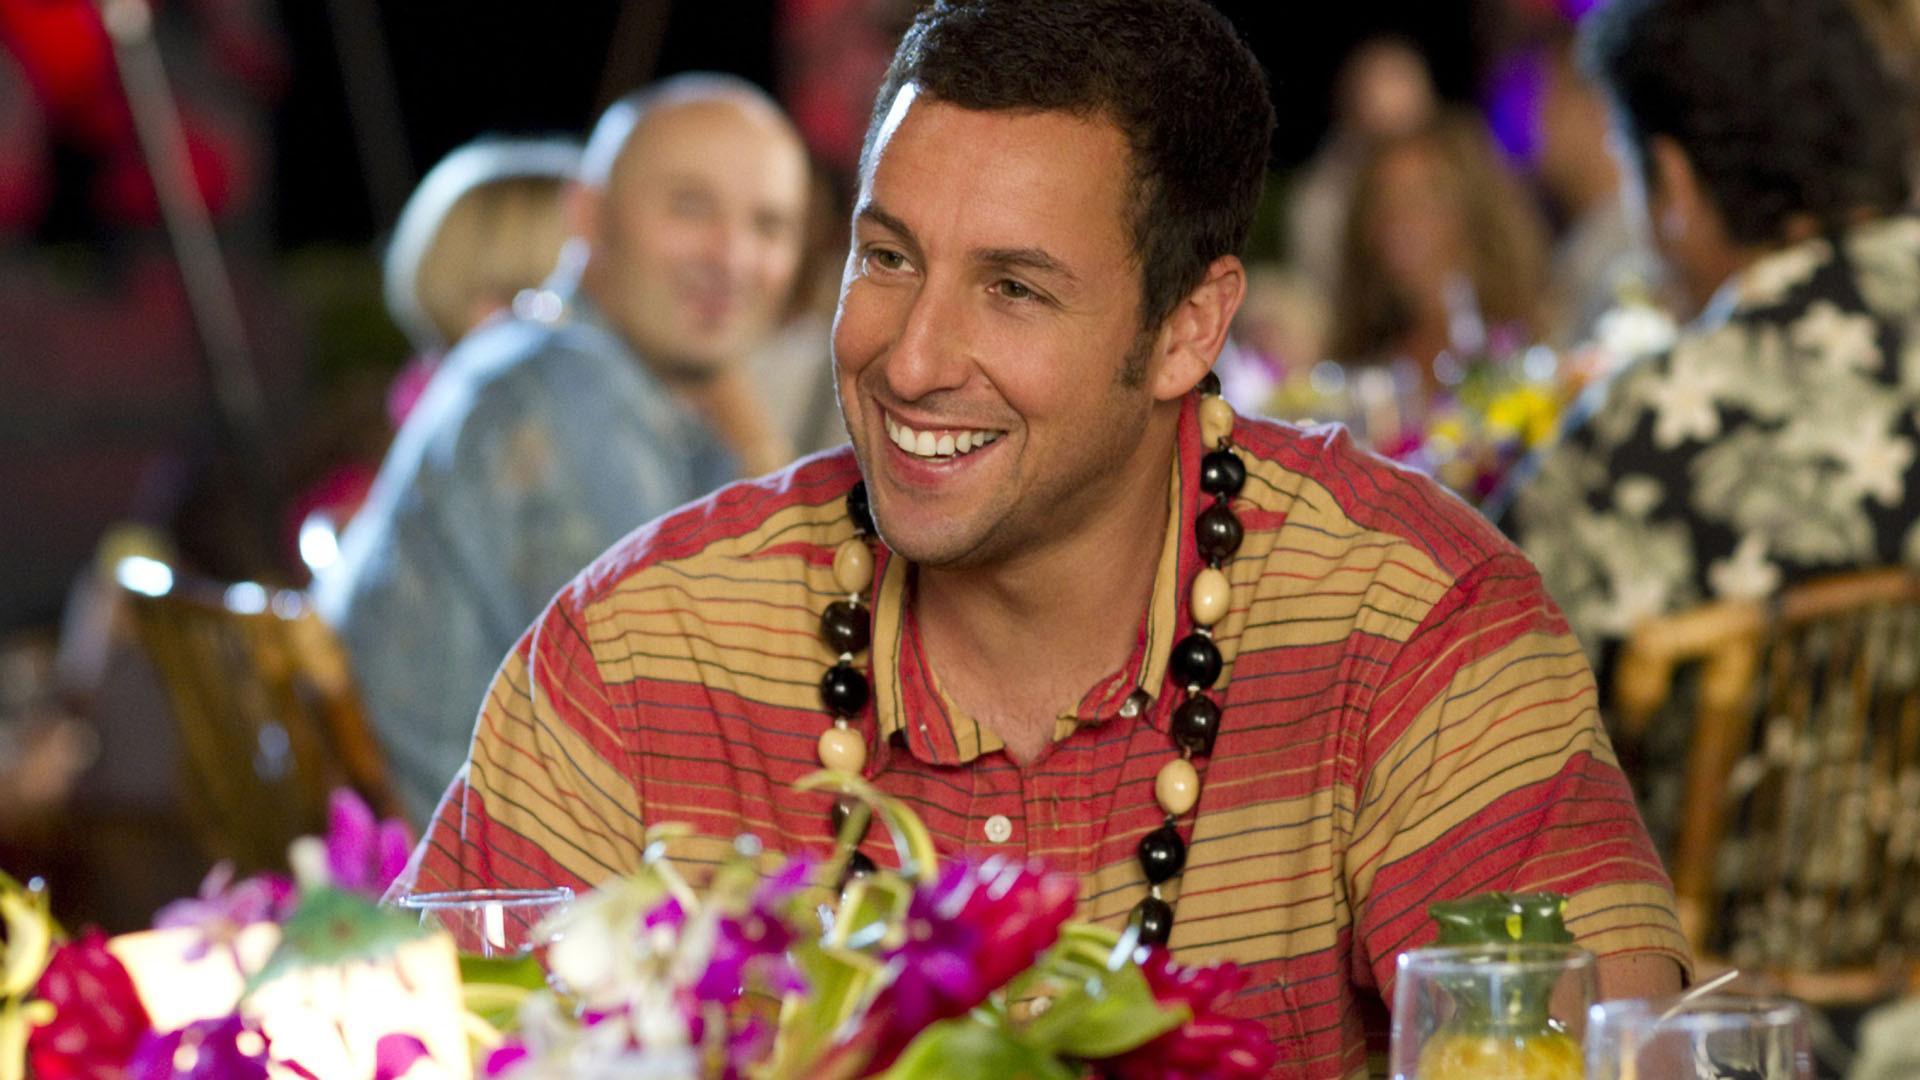 50 first dates movie poster hddownload